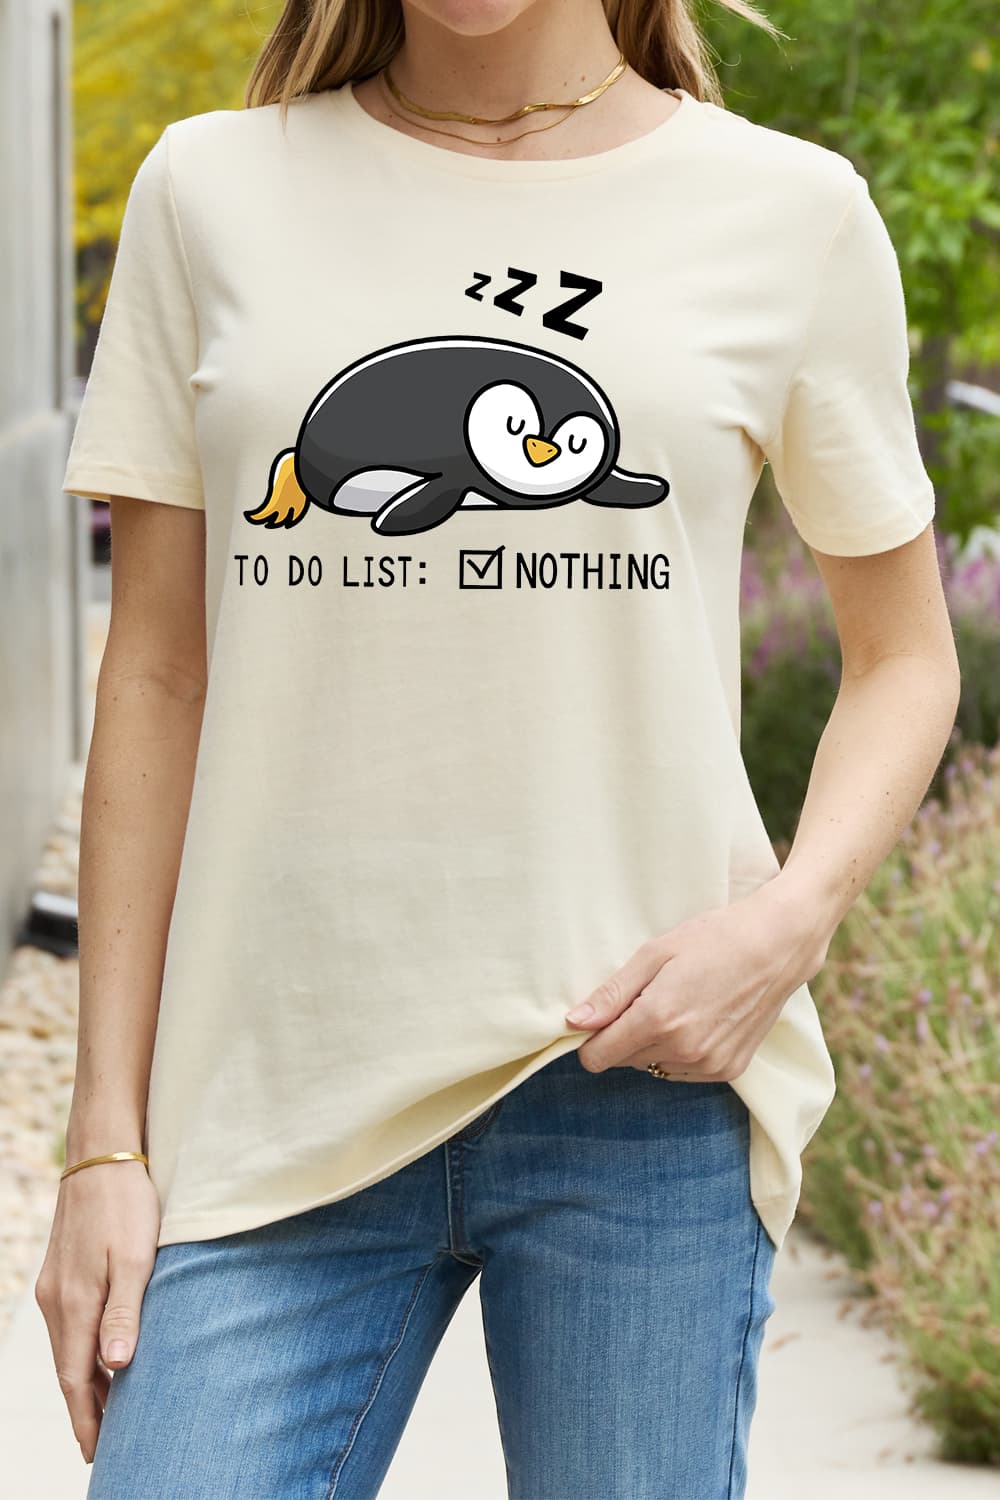 Simply Love Full Size TO DO LIST NOTHING Graphic Cotton Tee